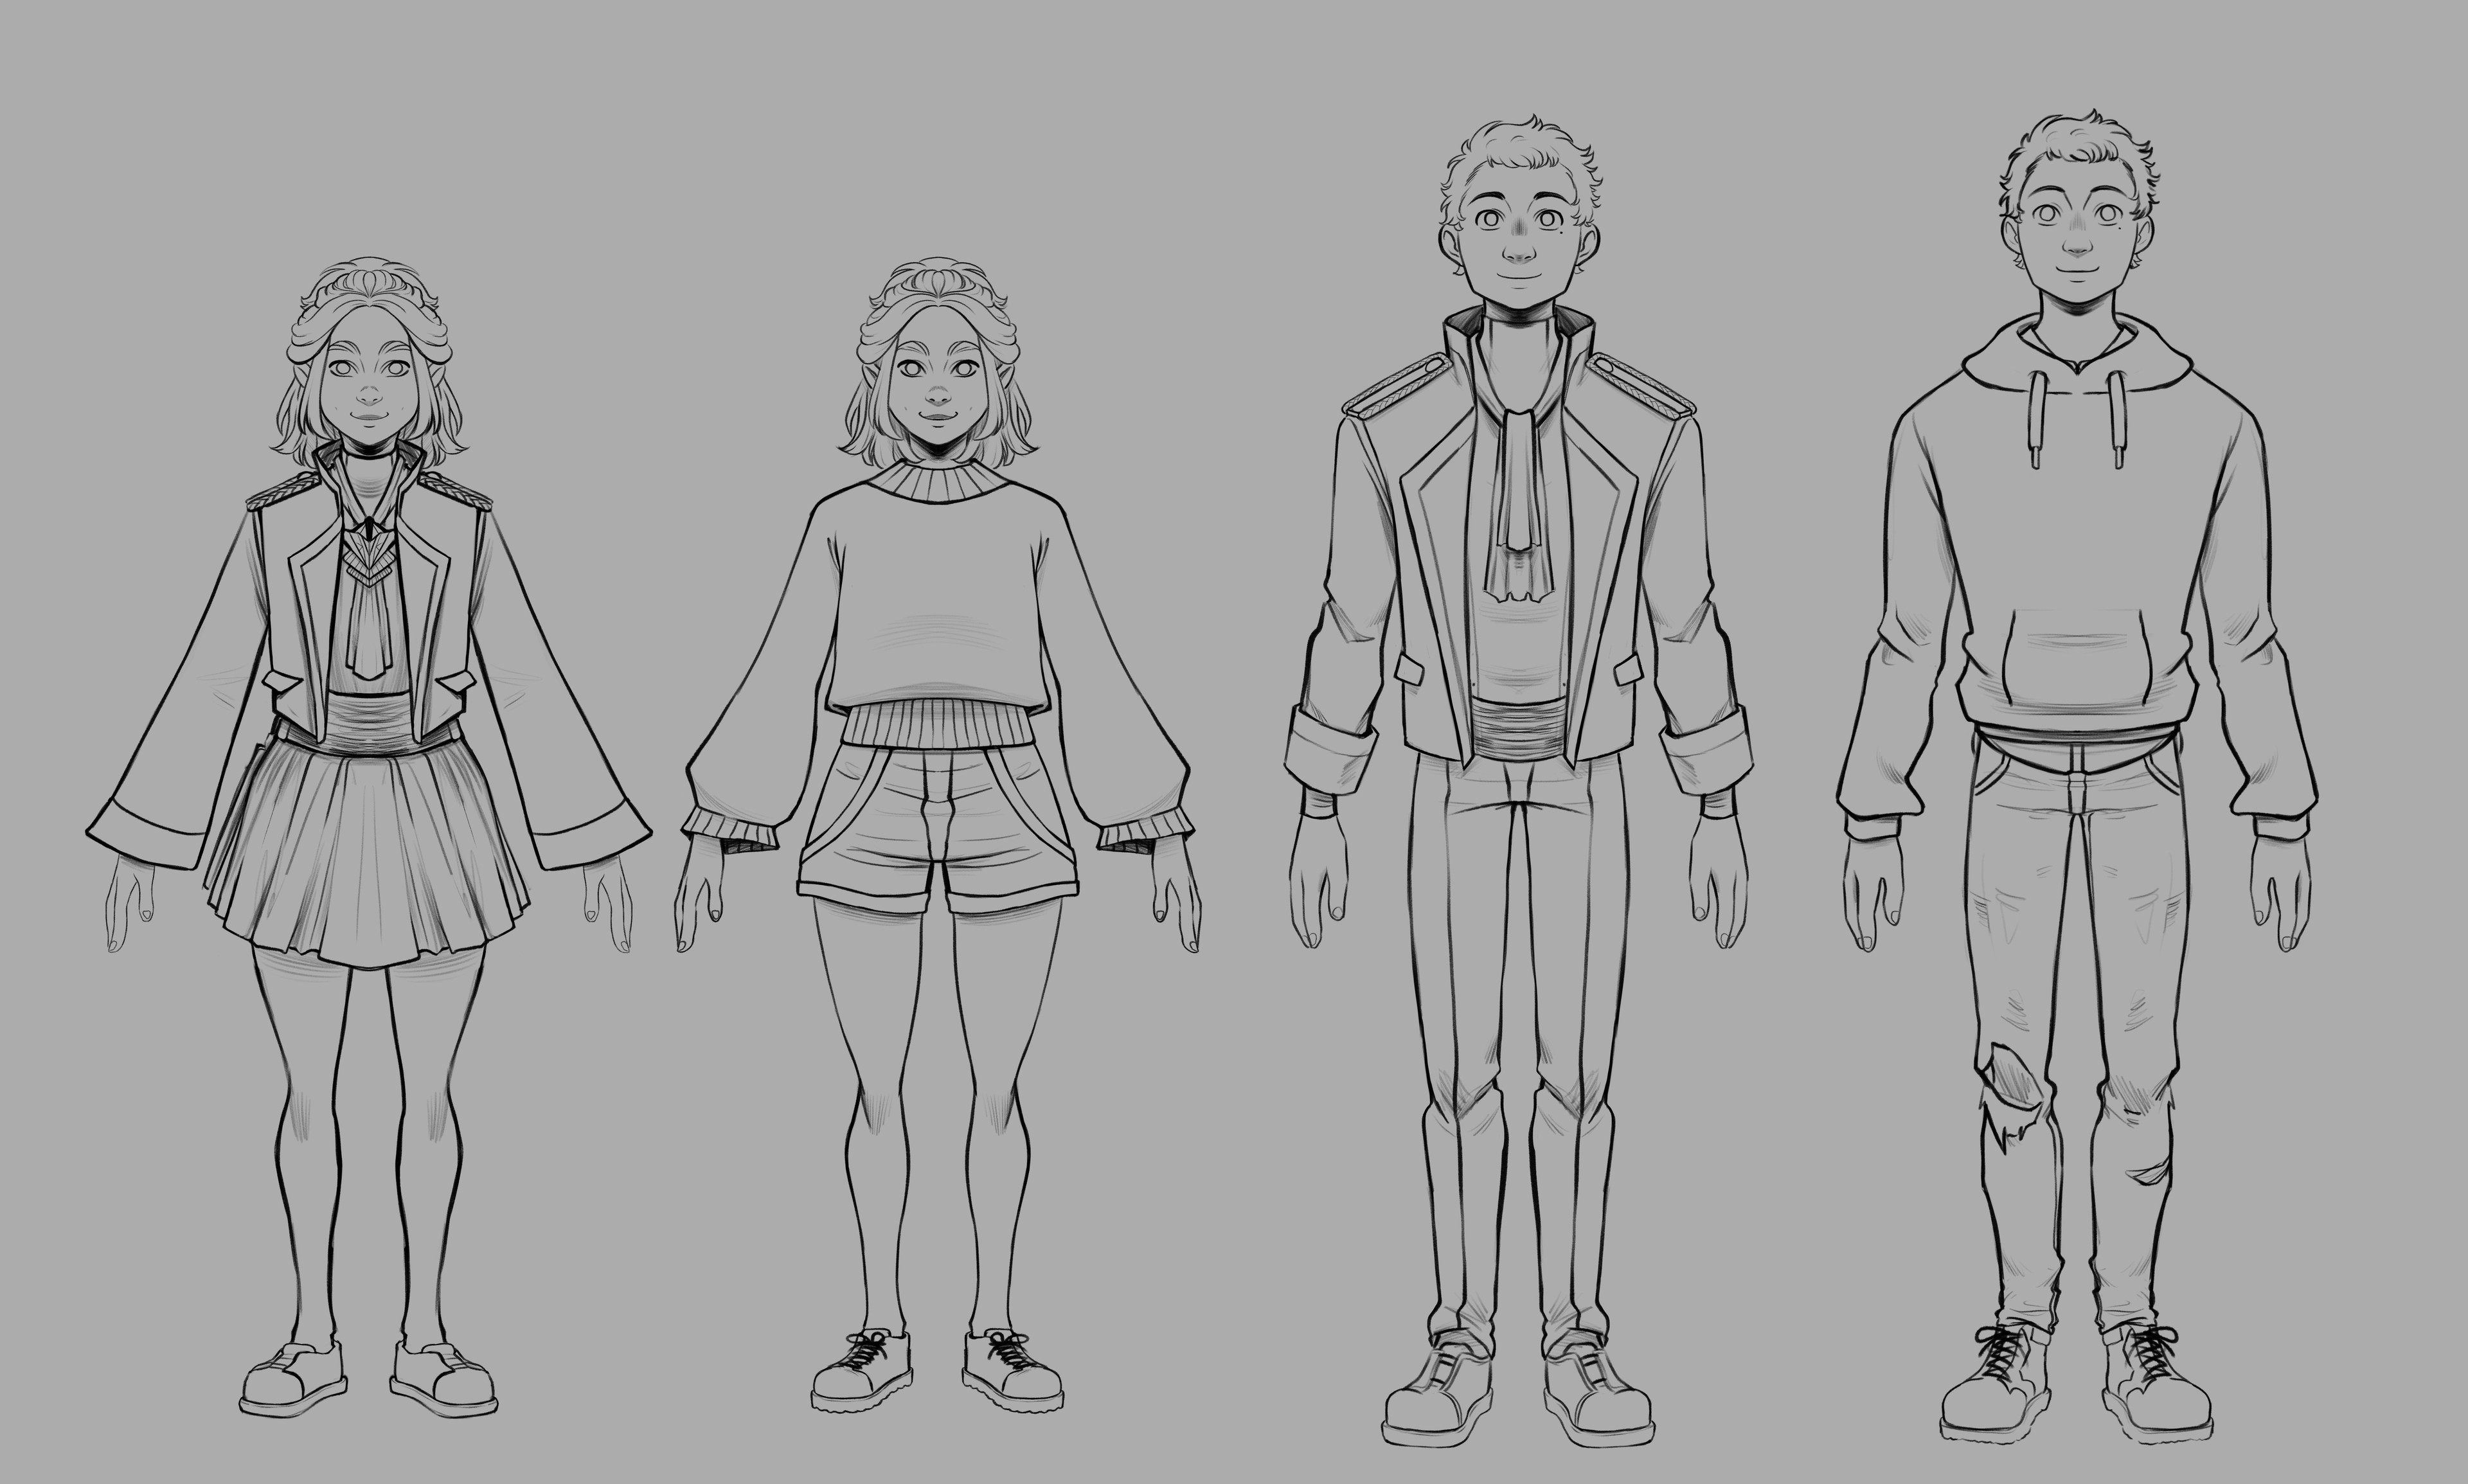 This was the first take on the uniforms, I was trying to keep the silhouettes cohesive with the normal clothes. But it ended up looking too much like FE3H so changes were made. 